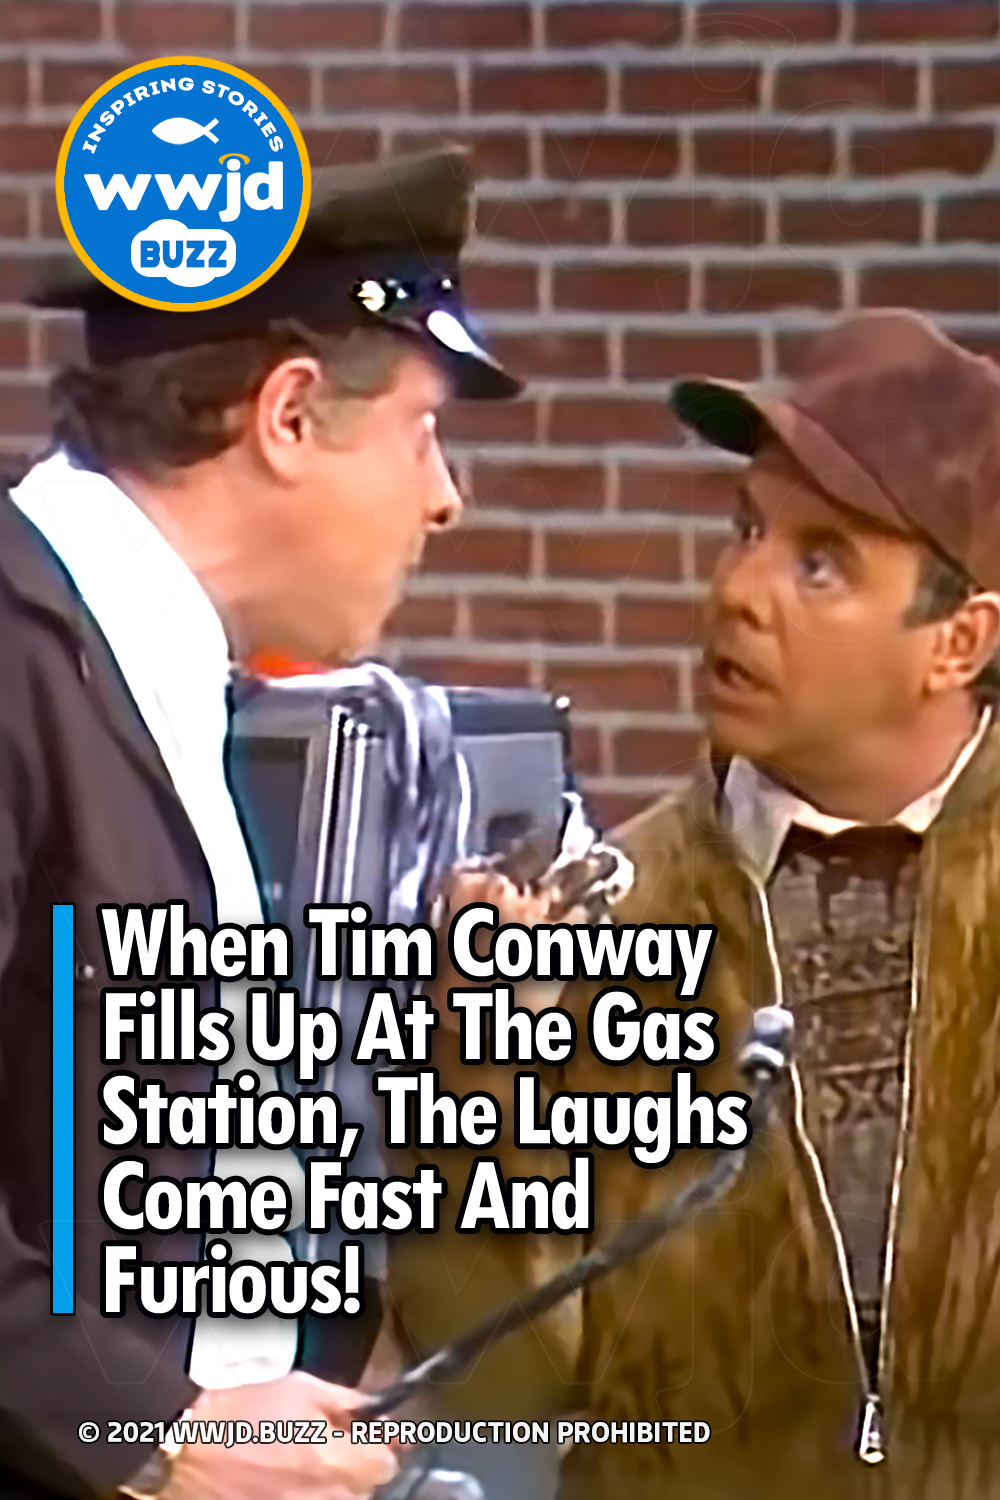 When Tim Conway Fills Up At The Gas Station, The Laughs Come Fast And Furious!